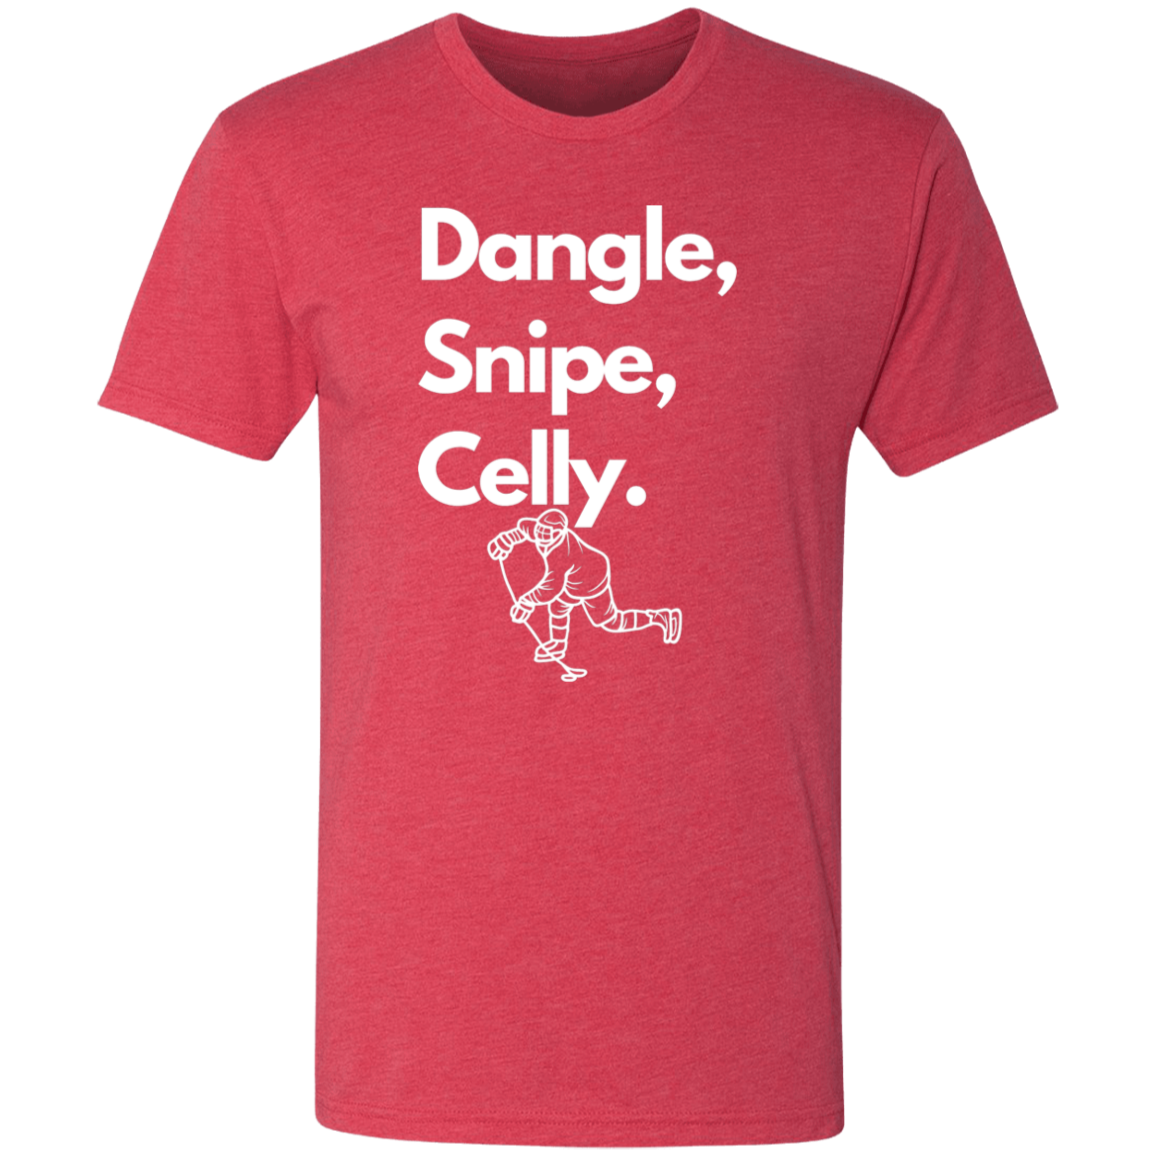 Dangle-Snipe-Celly, Men's Triblend  Hockey T-Shirt